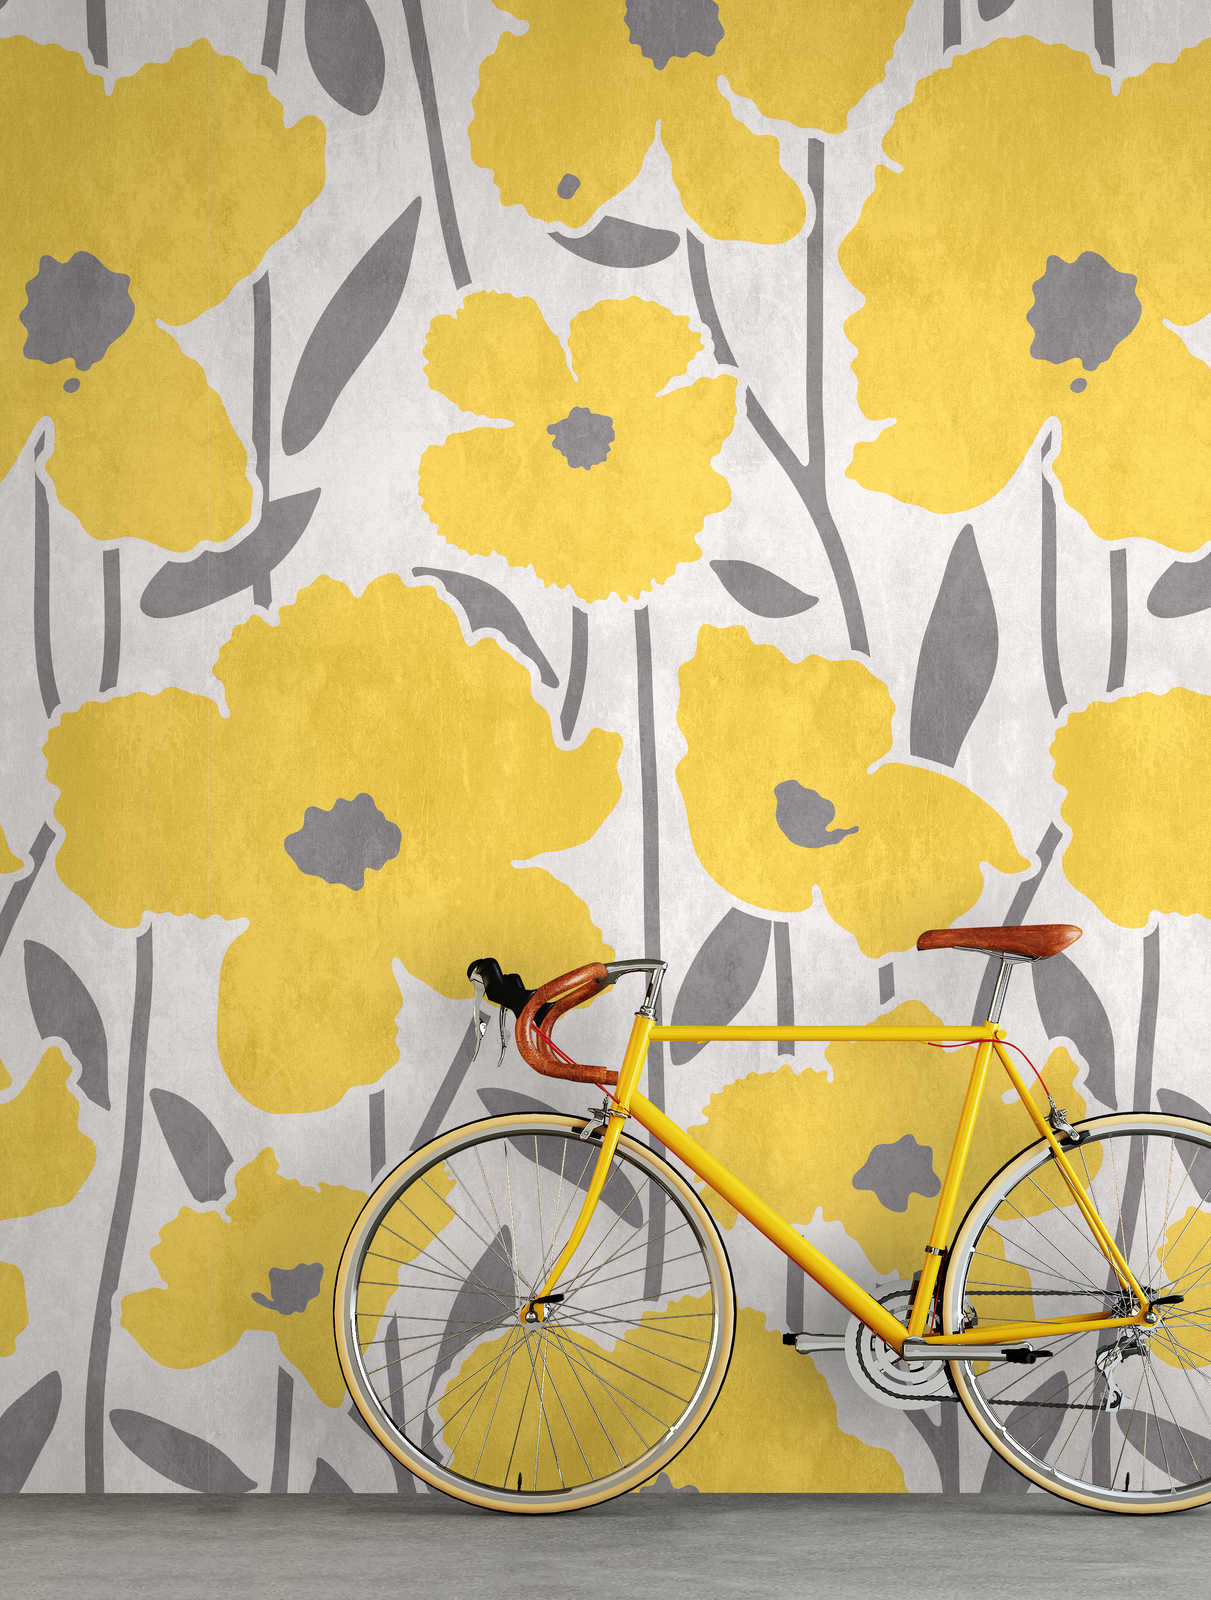             Flower Market 4 - flowers mural yellow & grey with plaster effect
        